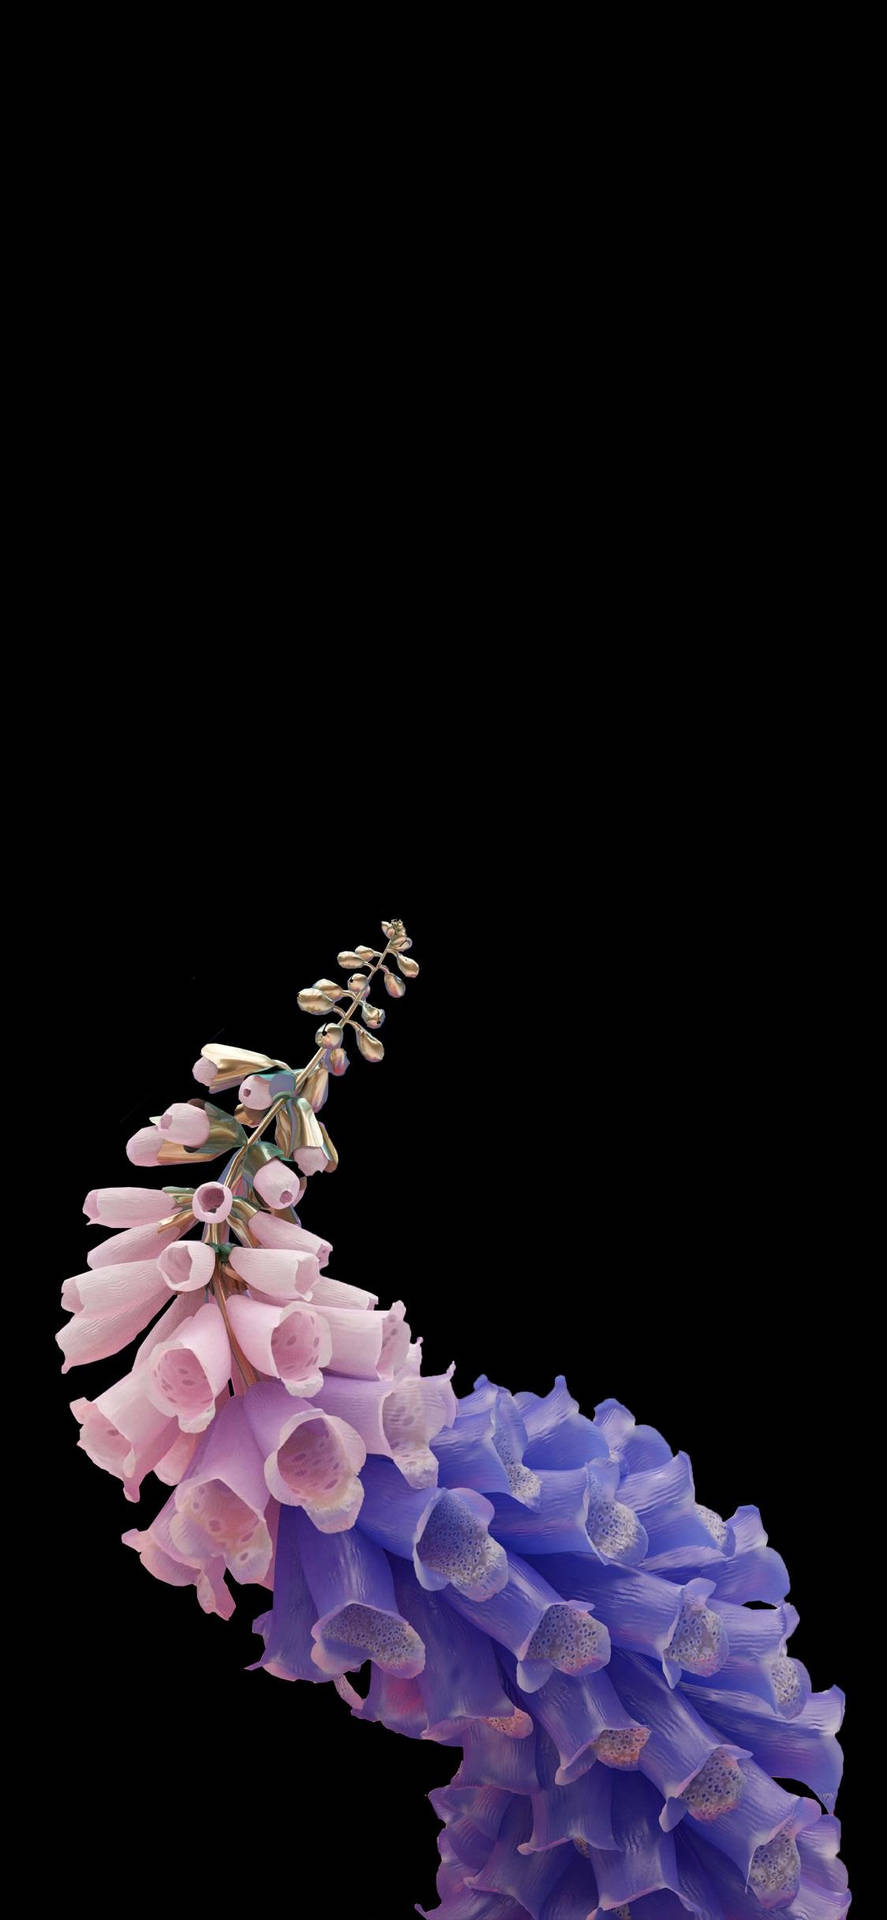 Lady's Glove Flower Oled Iphone Wallpaper